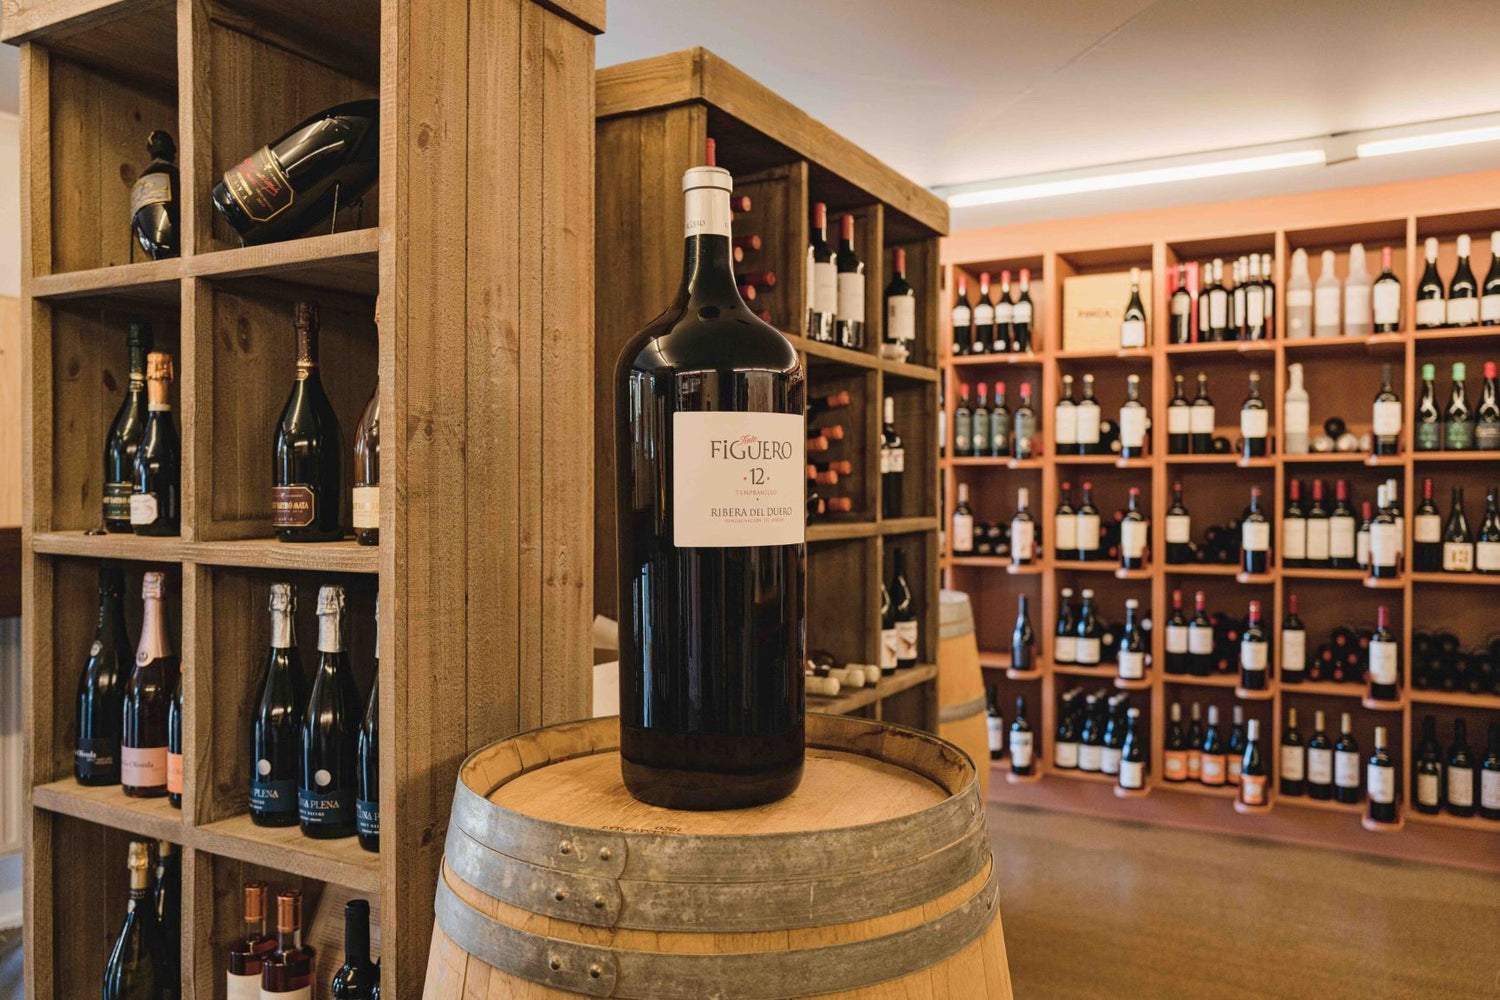 An image showing a 12 litre Figuero wine bottle displayed at Elvino